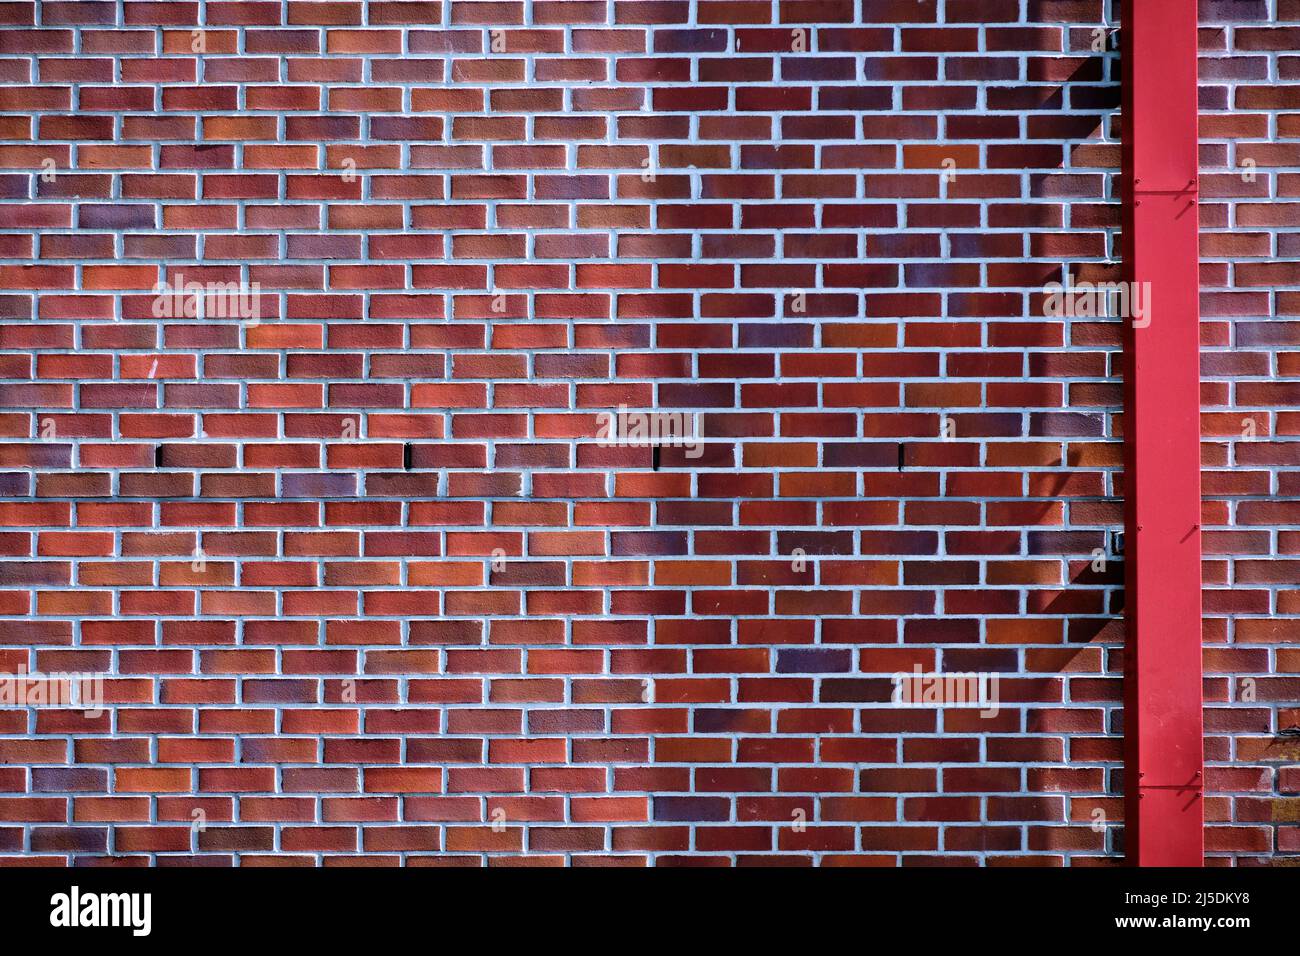 Brick wall with bricks in shades of red from orange to purple.  Red gutter pipe crosses the brick providing contrast. Stock Photo